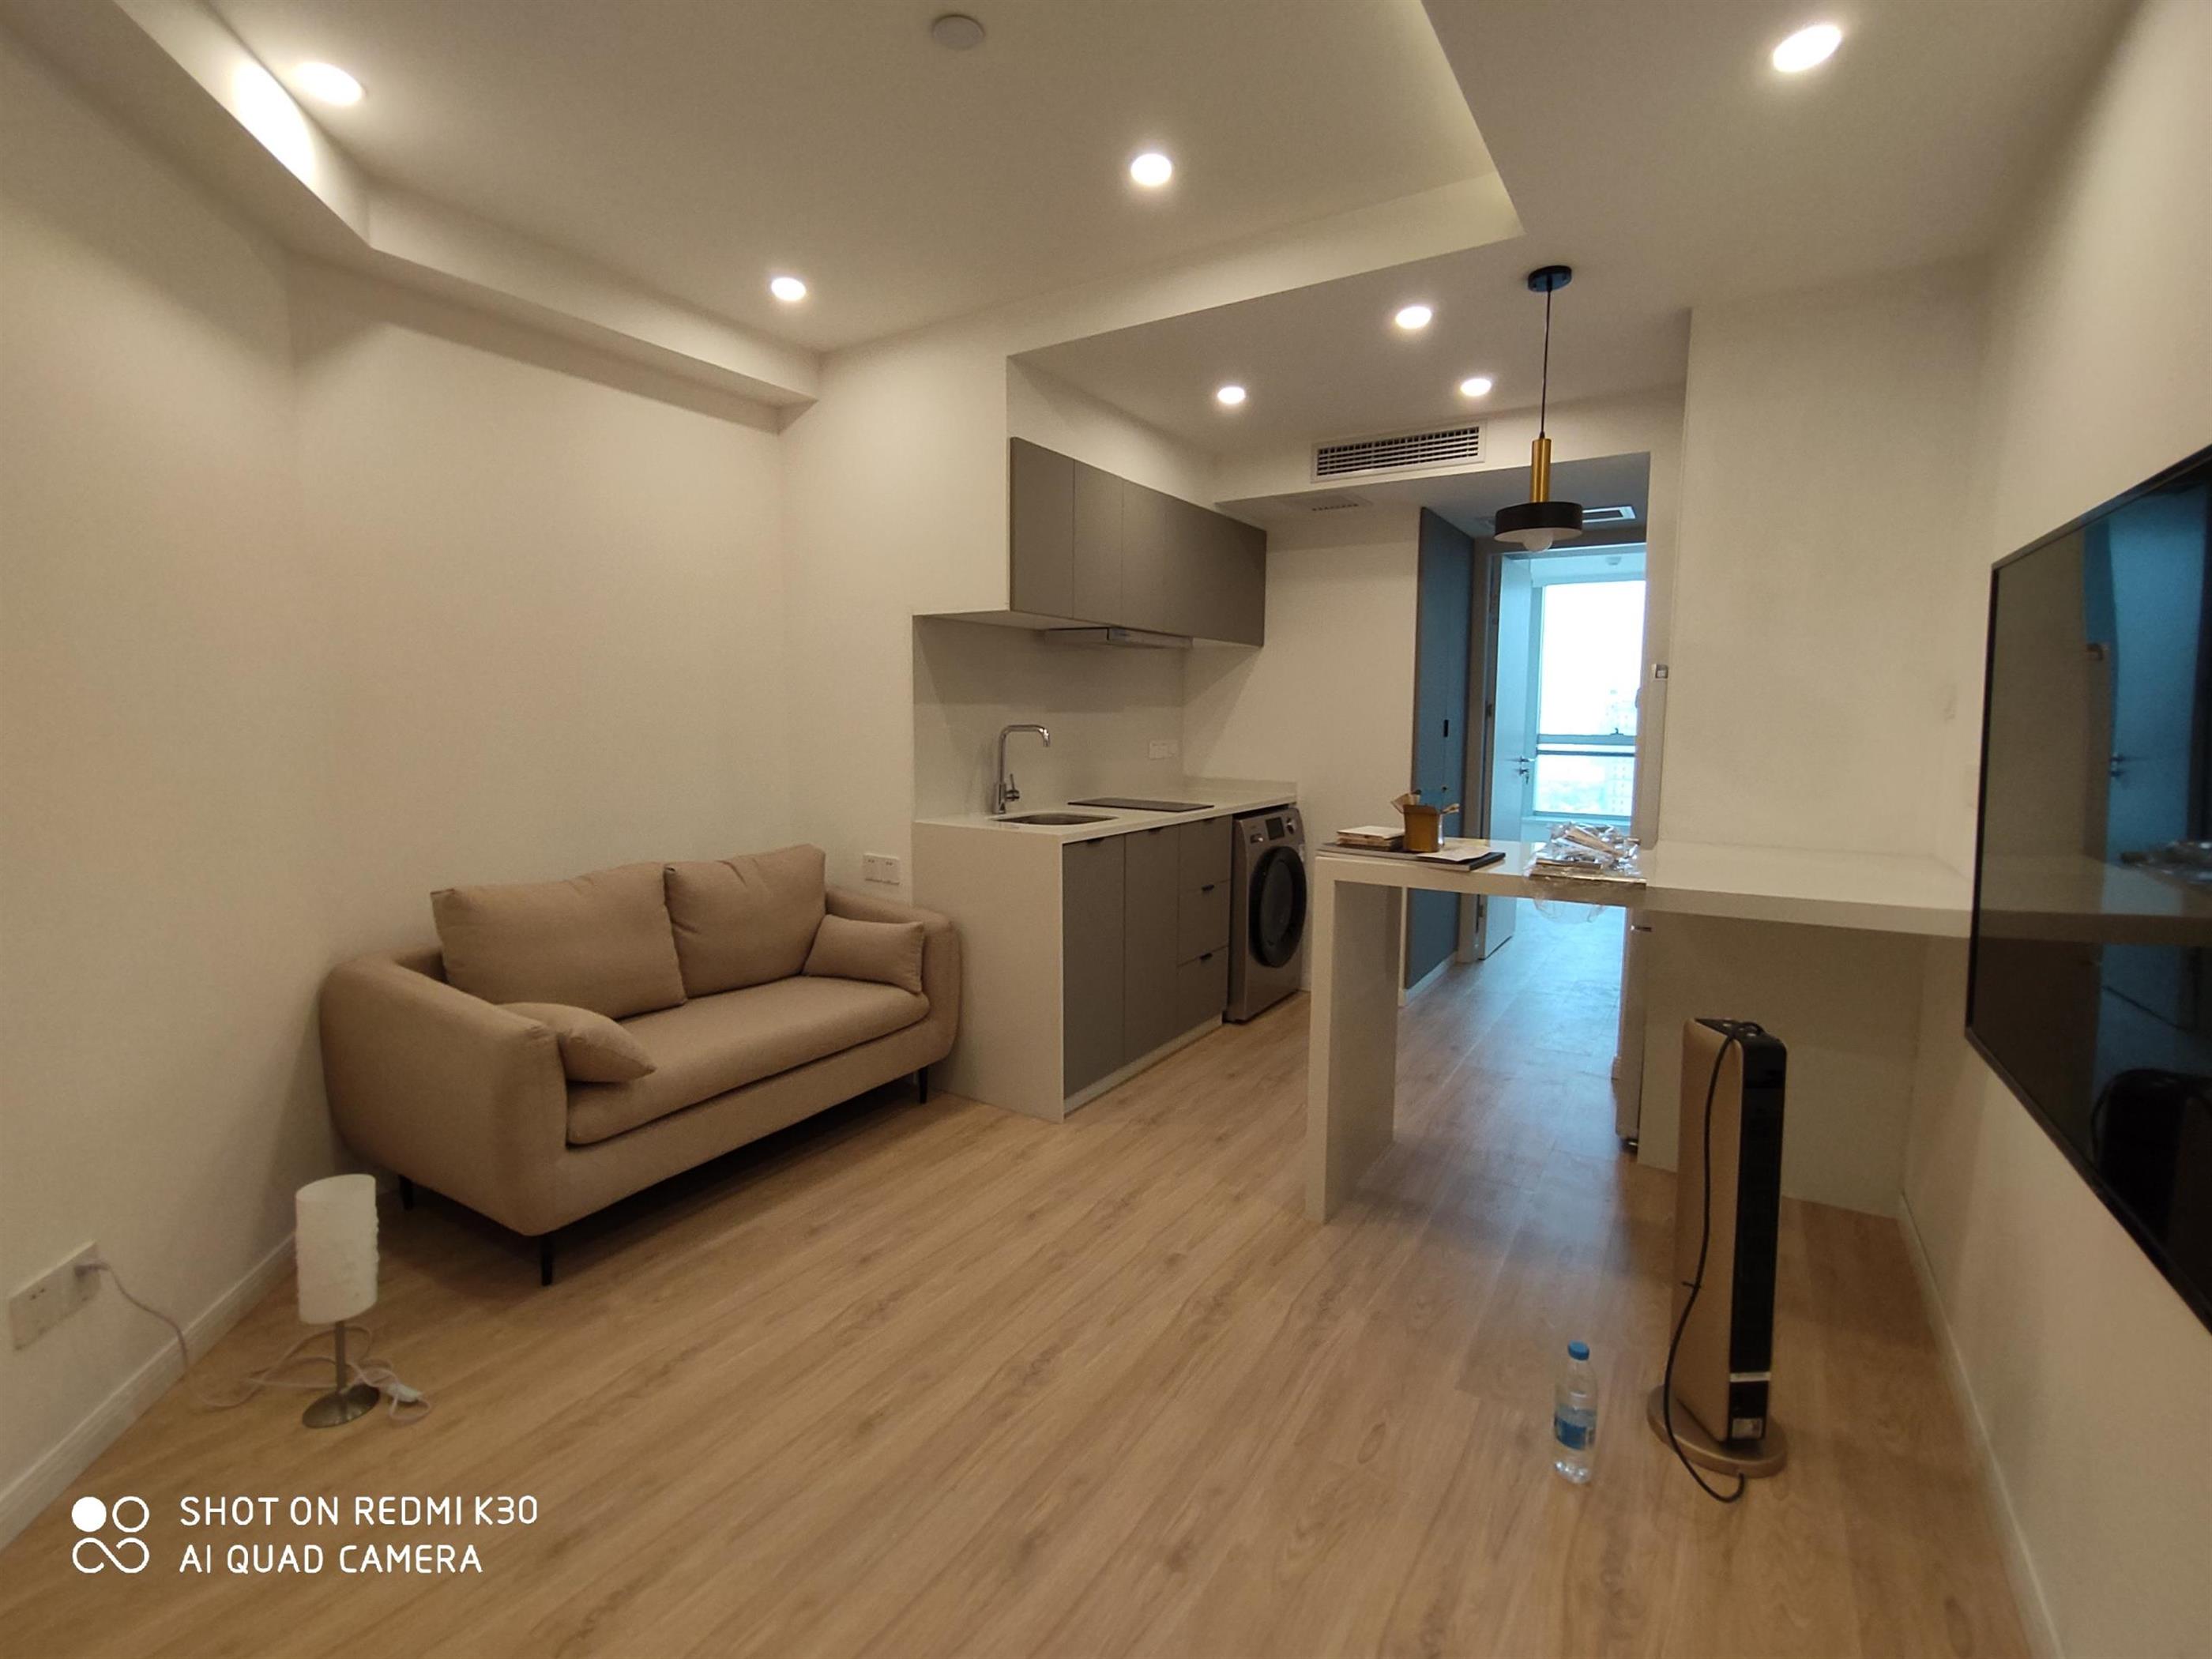 Bright new floor Convenient Short+Long-term 1BR for Rent in Nanjing W Rd Shanghai